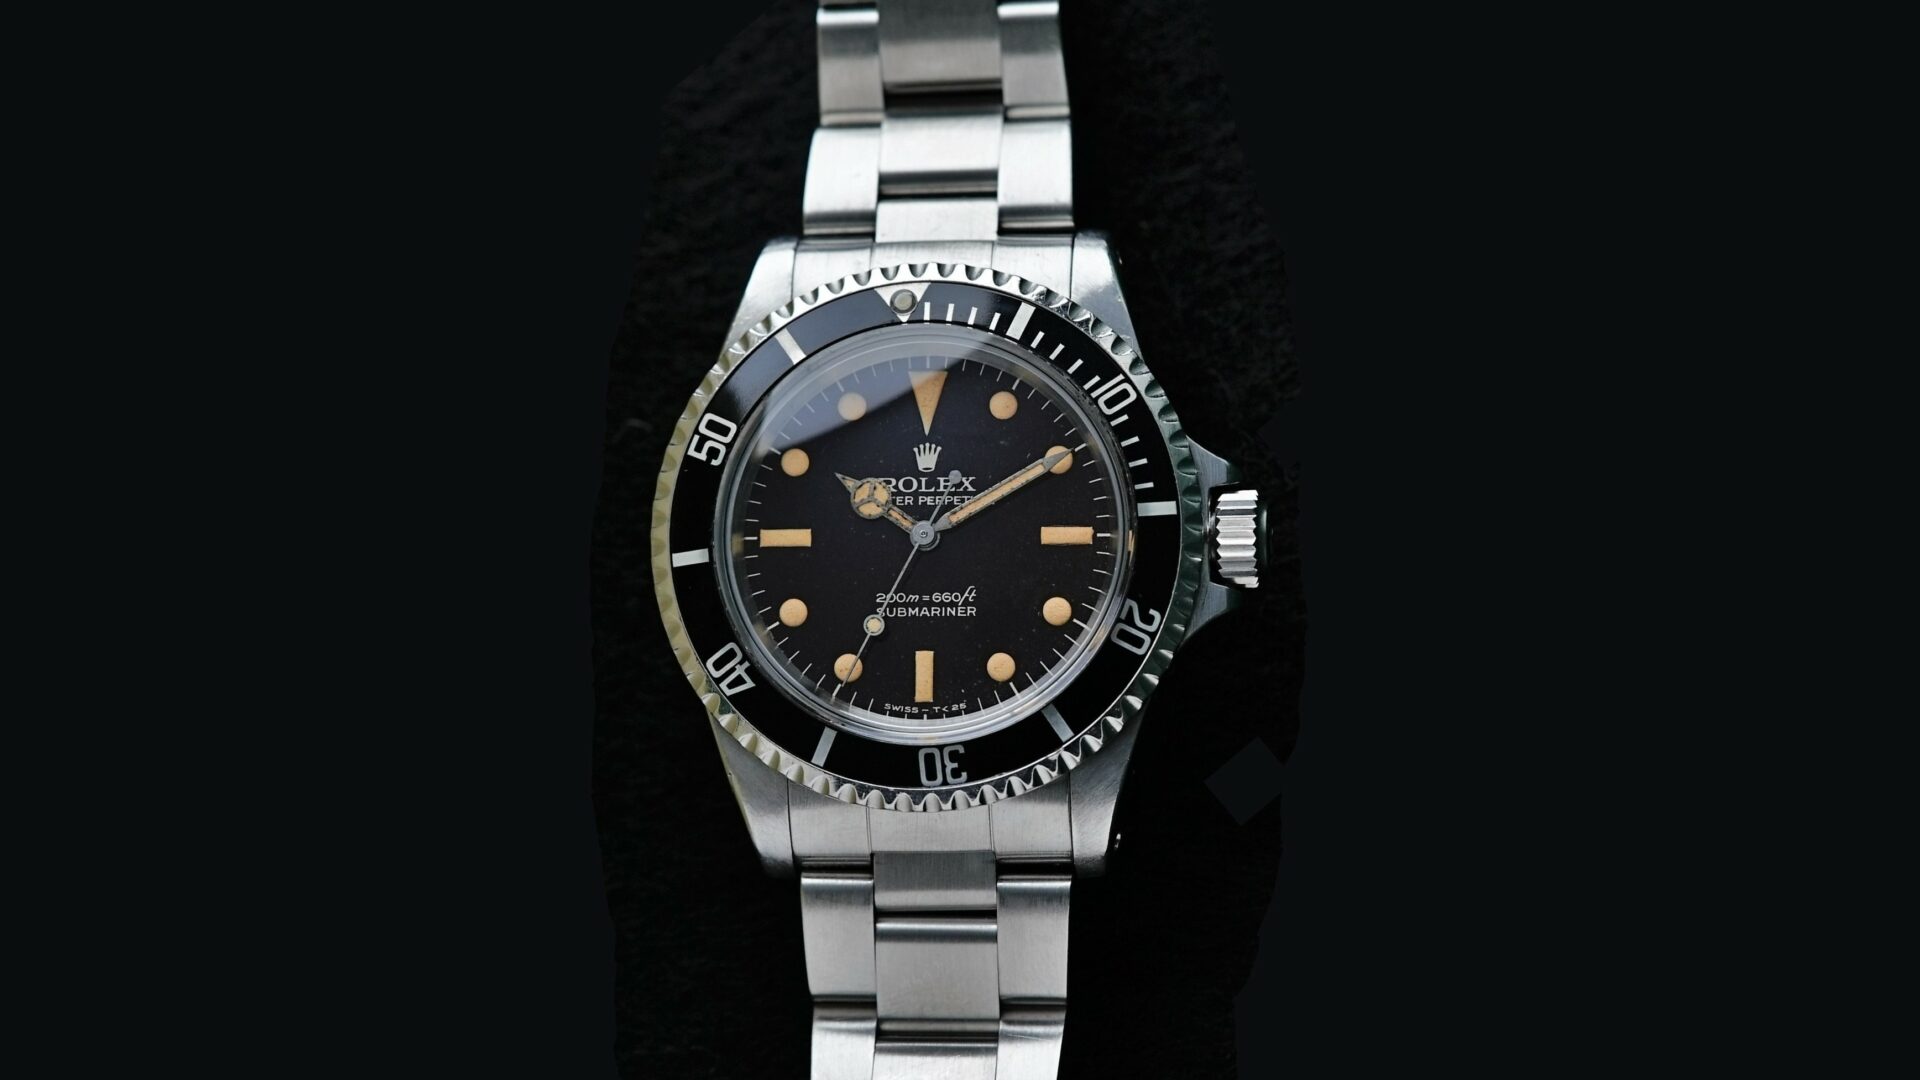 Rolex Submariner 5513 Bart Simpson Tropical Dial Original Patina Unpolished watch featured under white light.